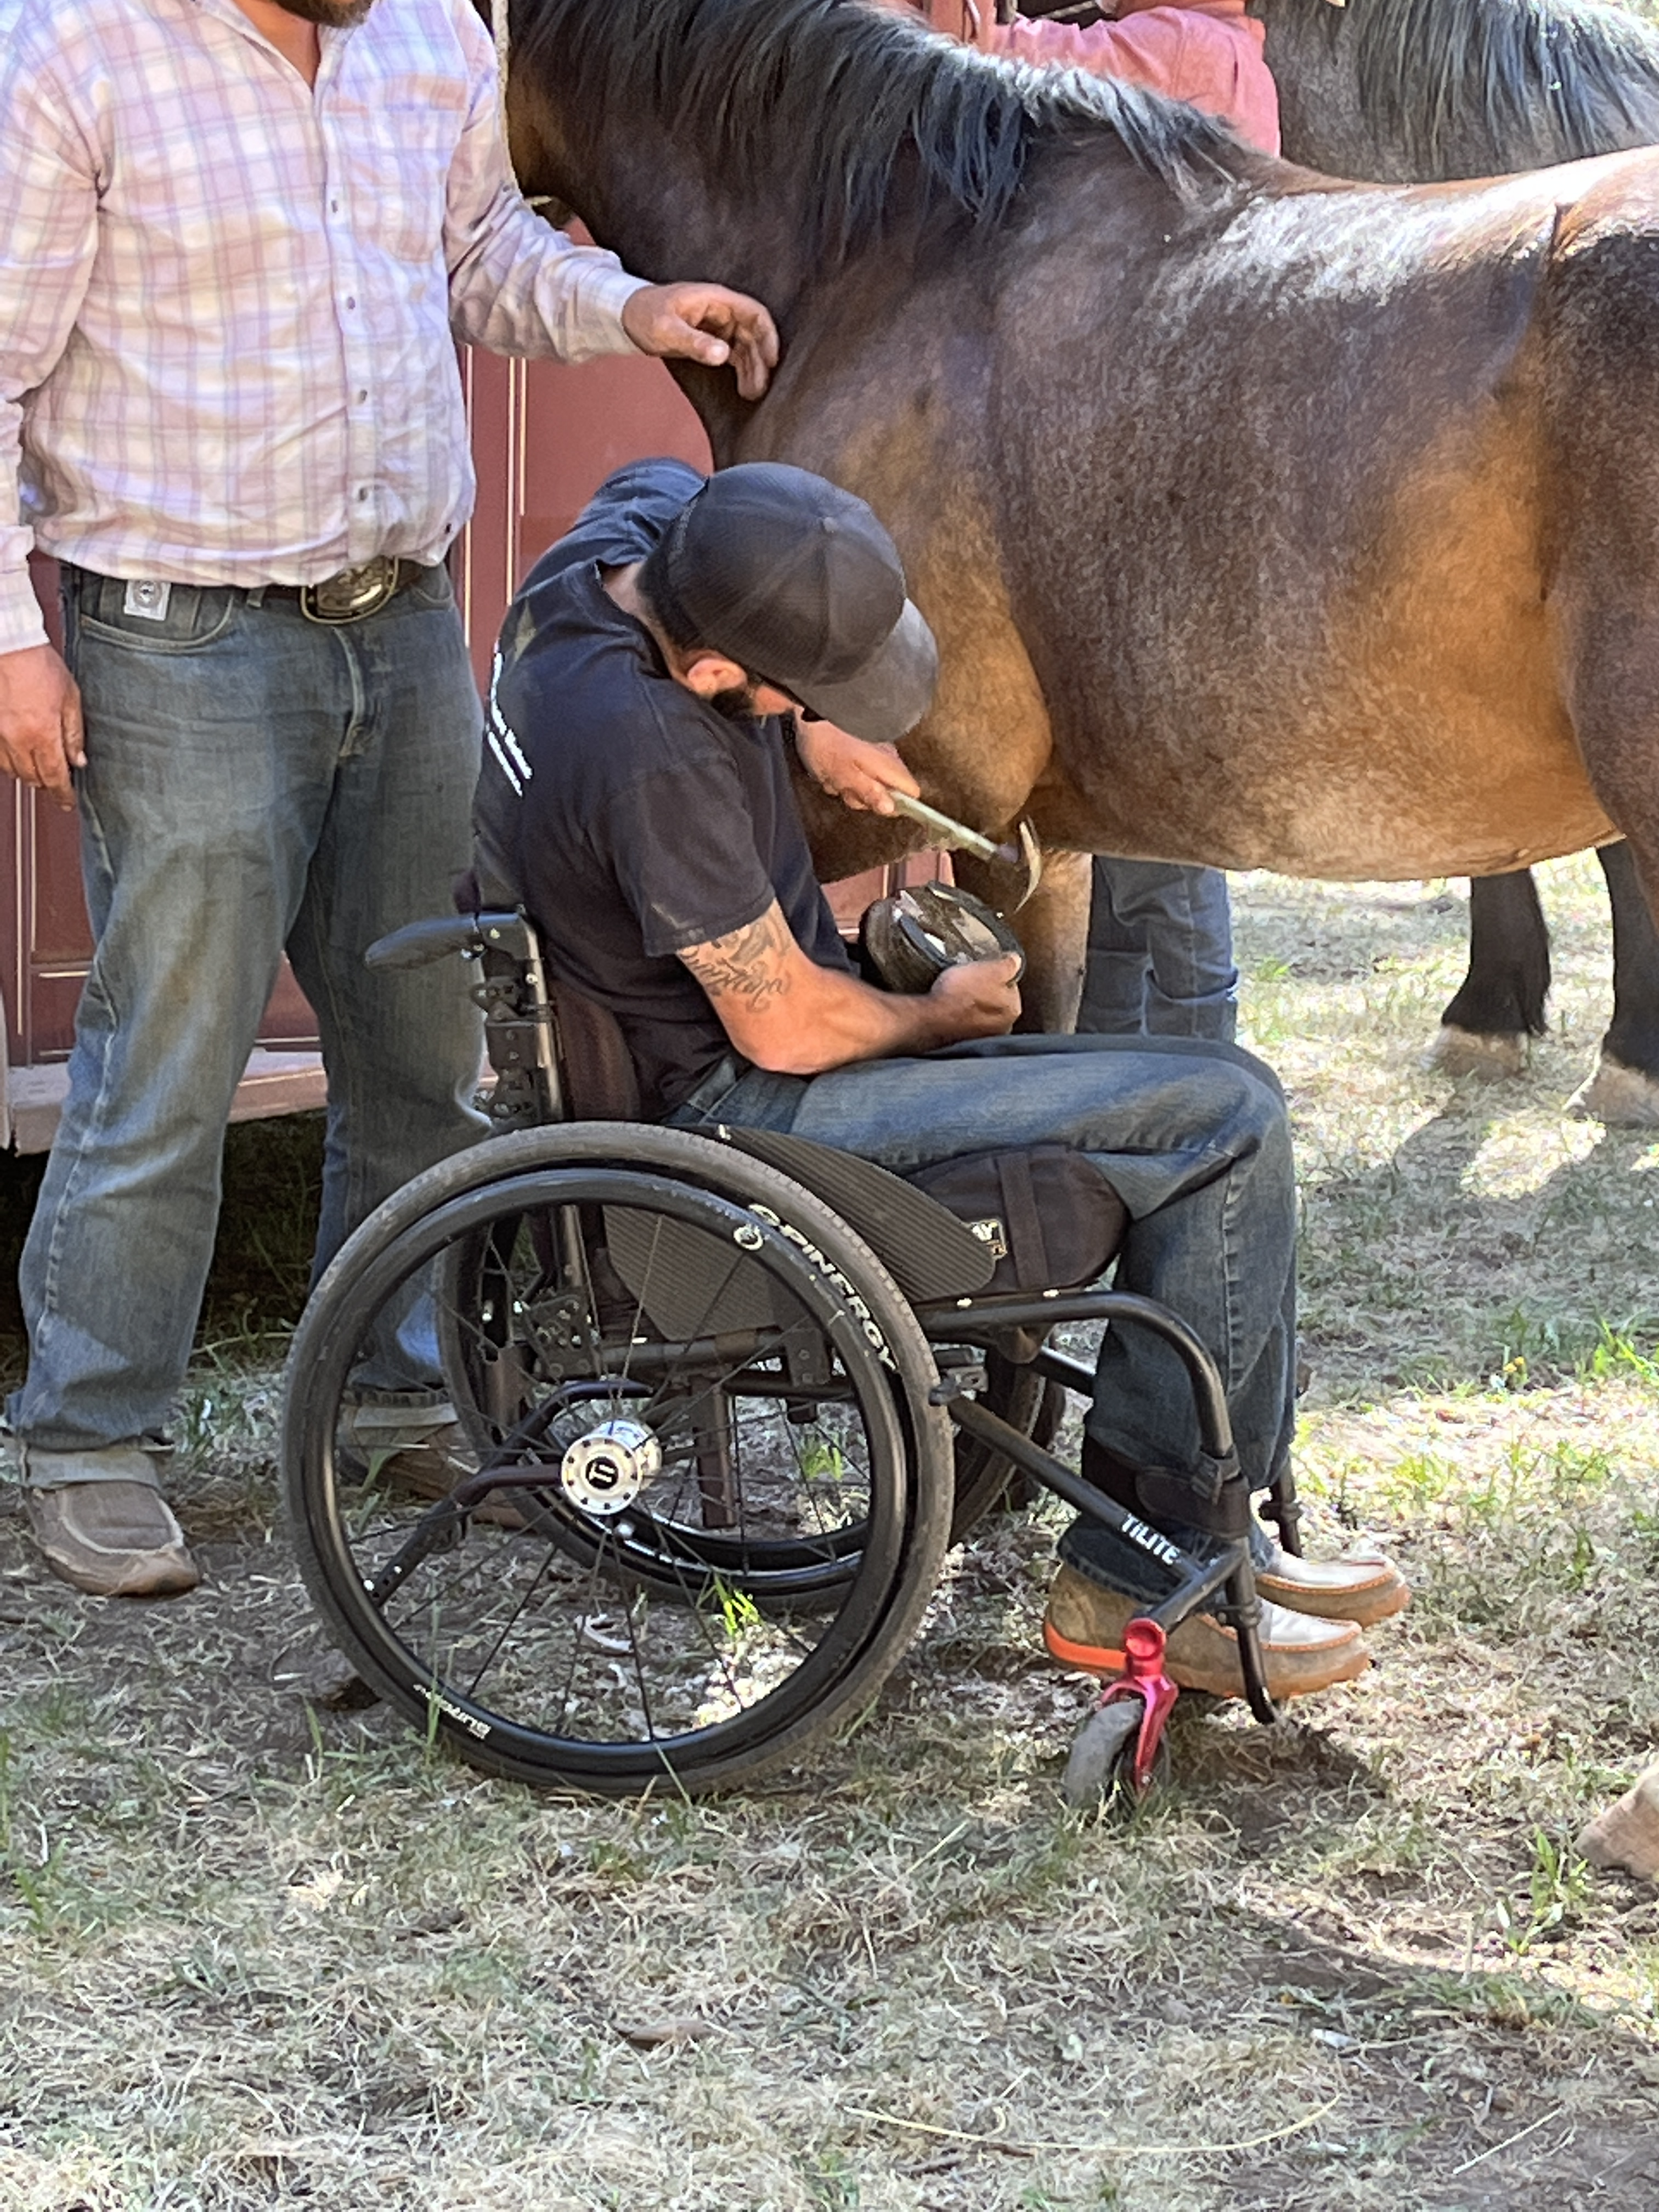 two men, one in a wheelchair, shoe a horse